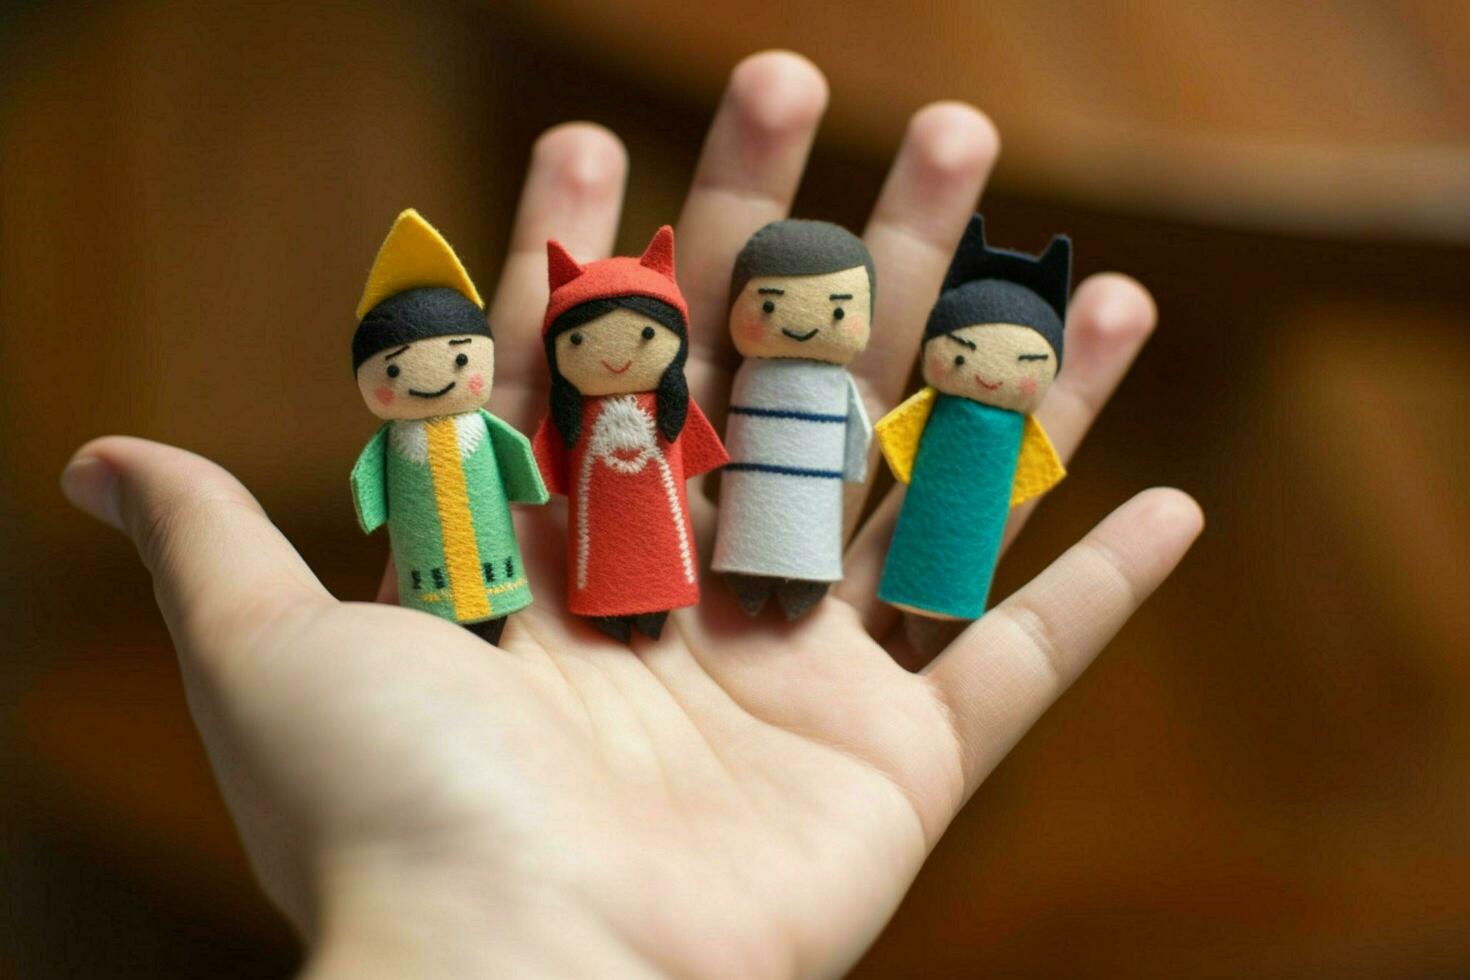 A set of finger puppets for imaginative play photo